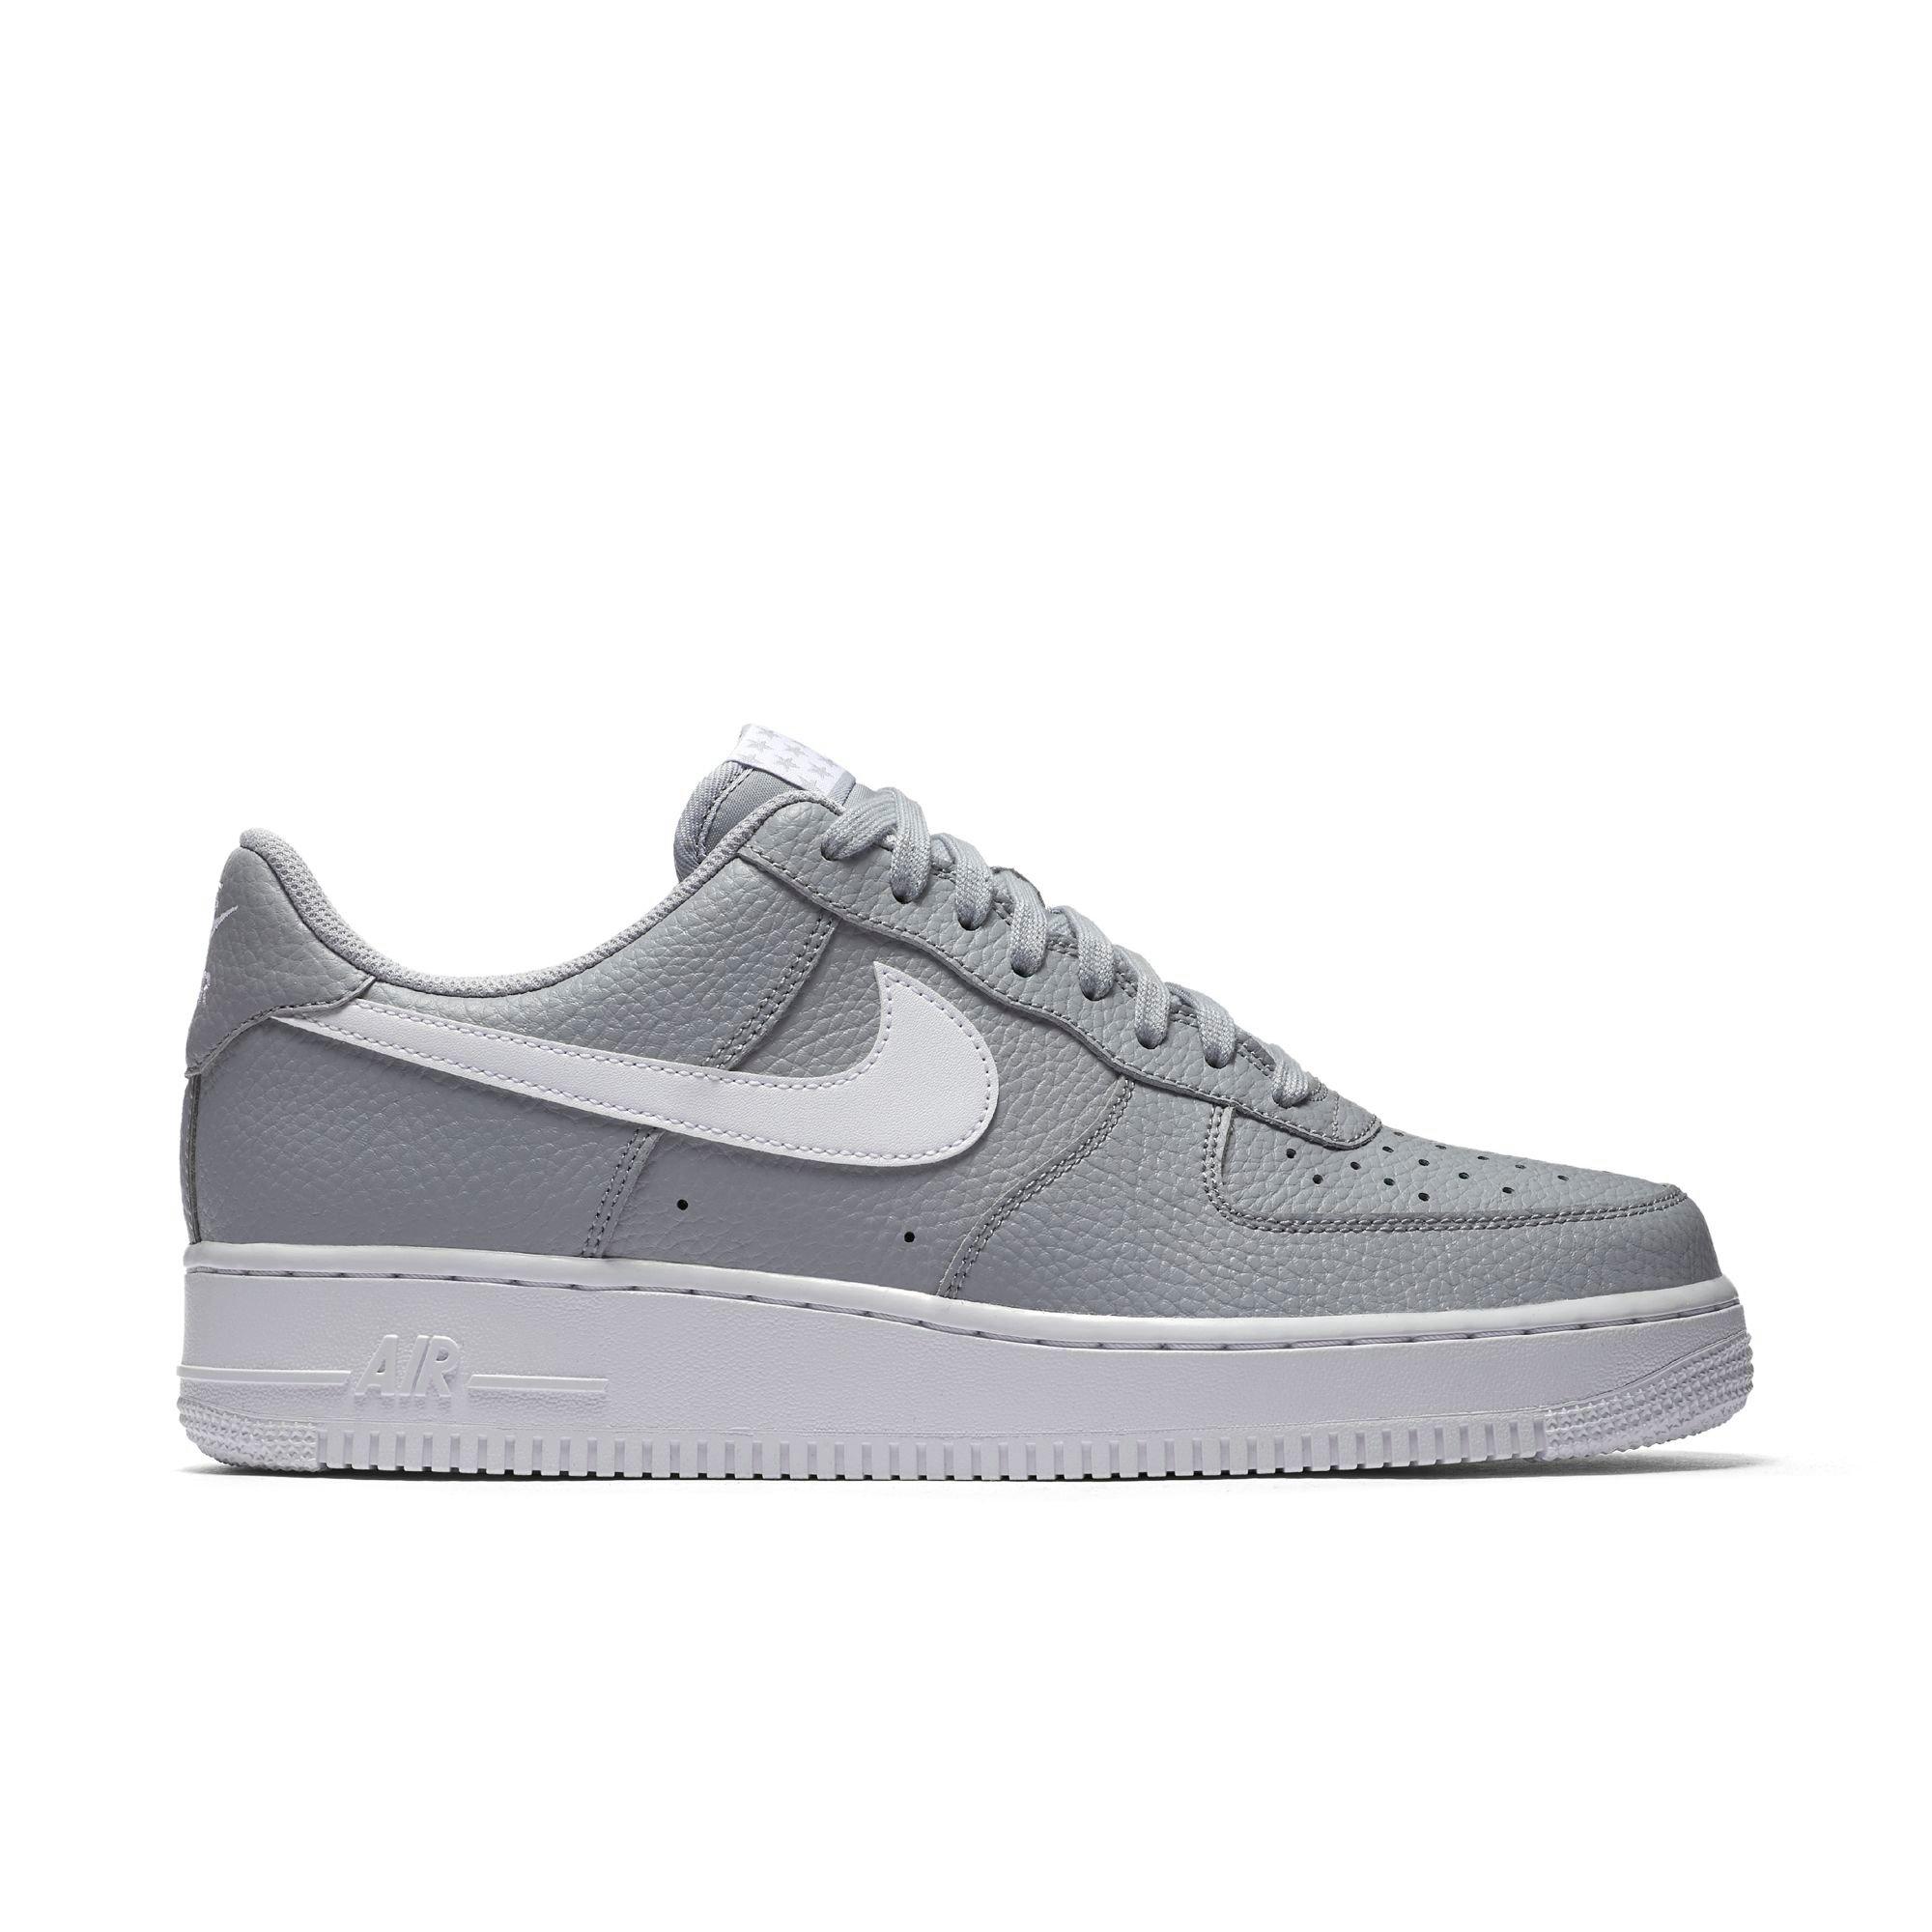 city gear air force ones